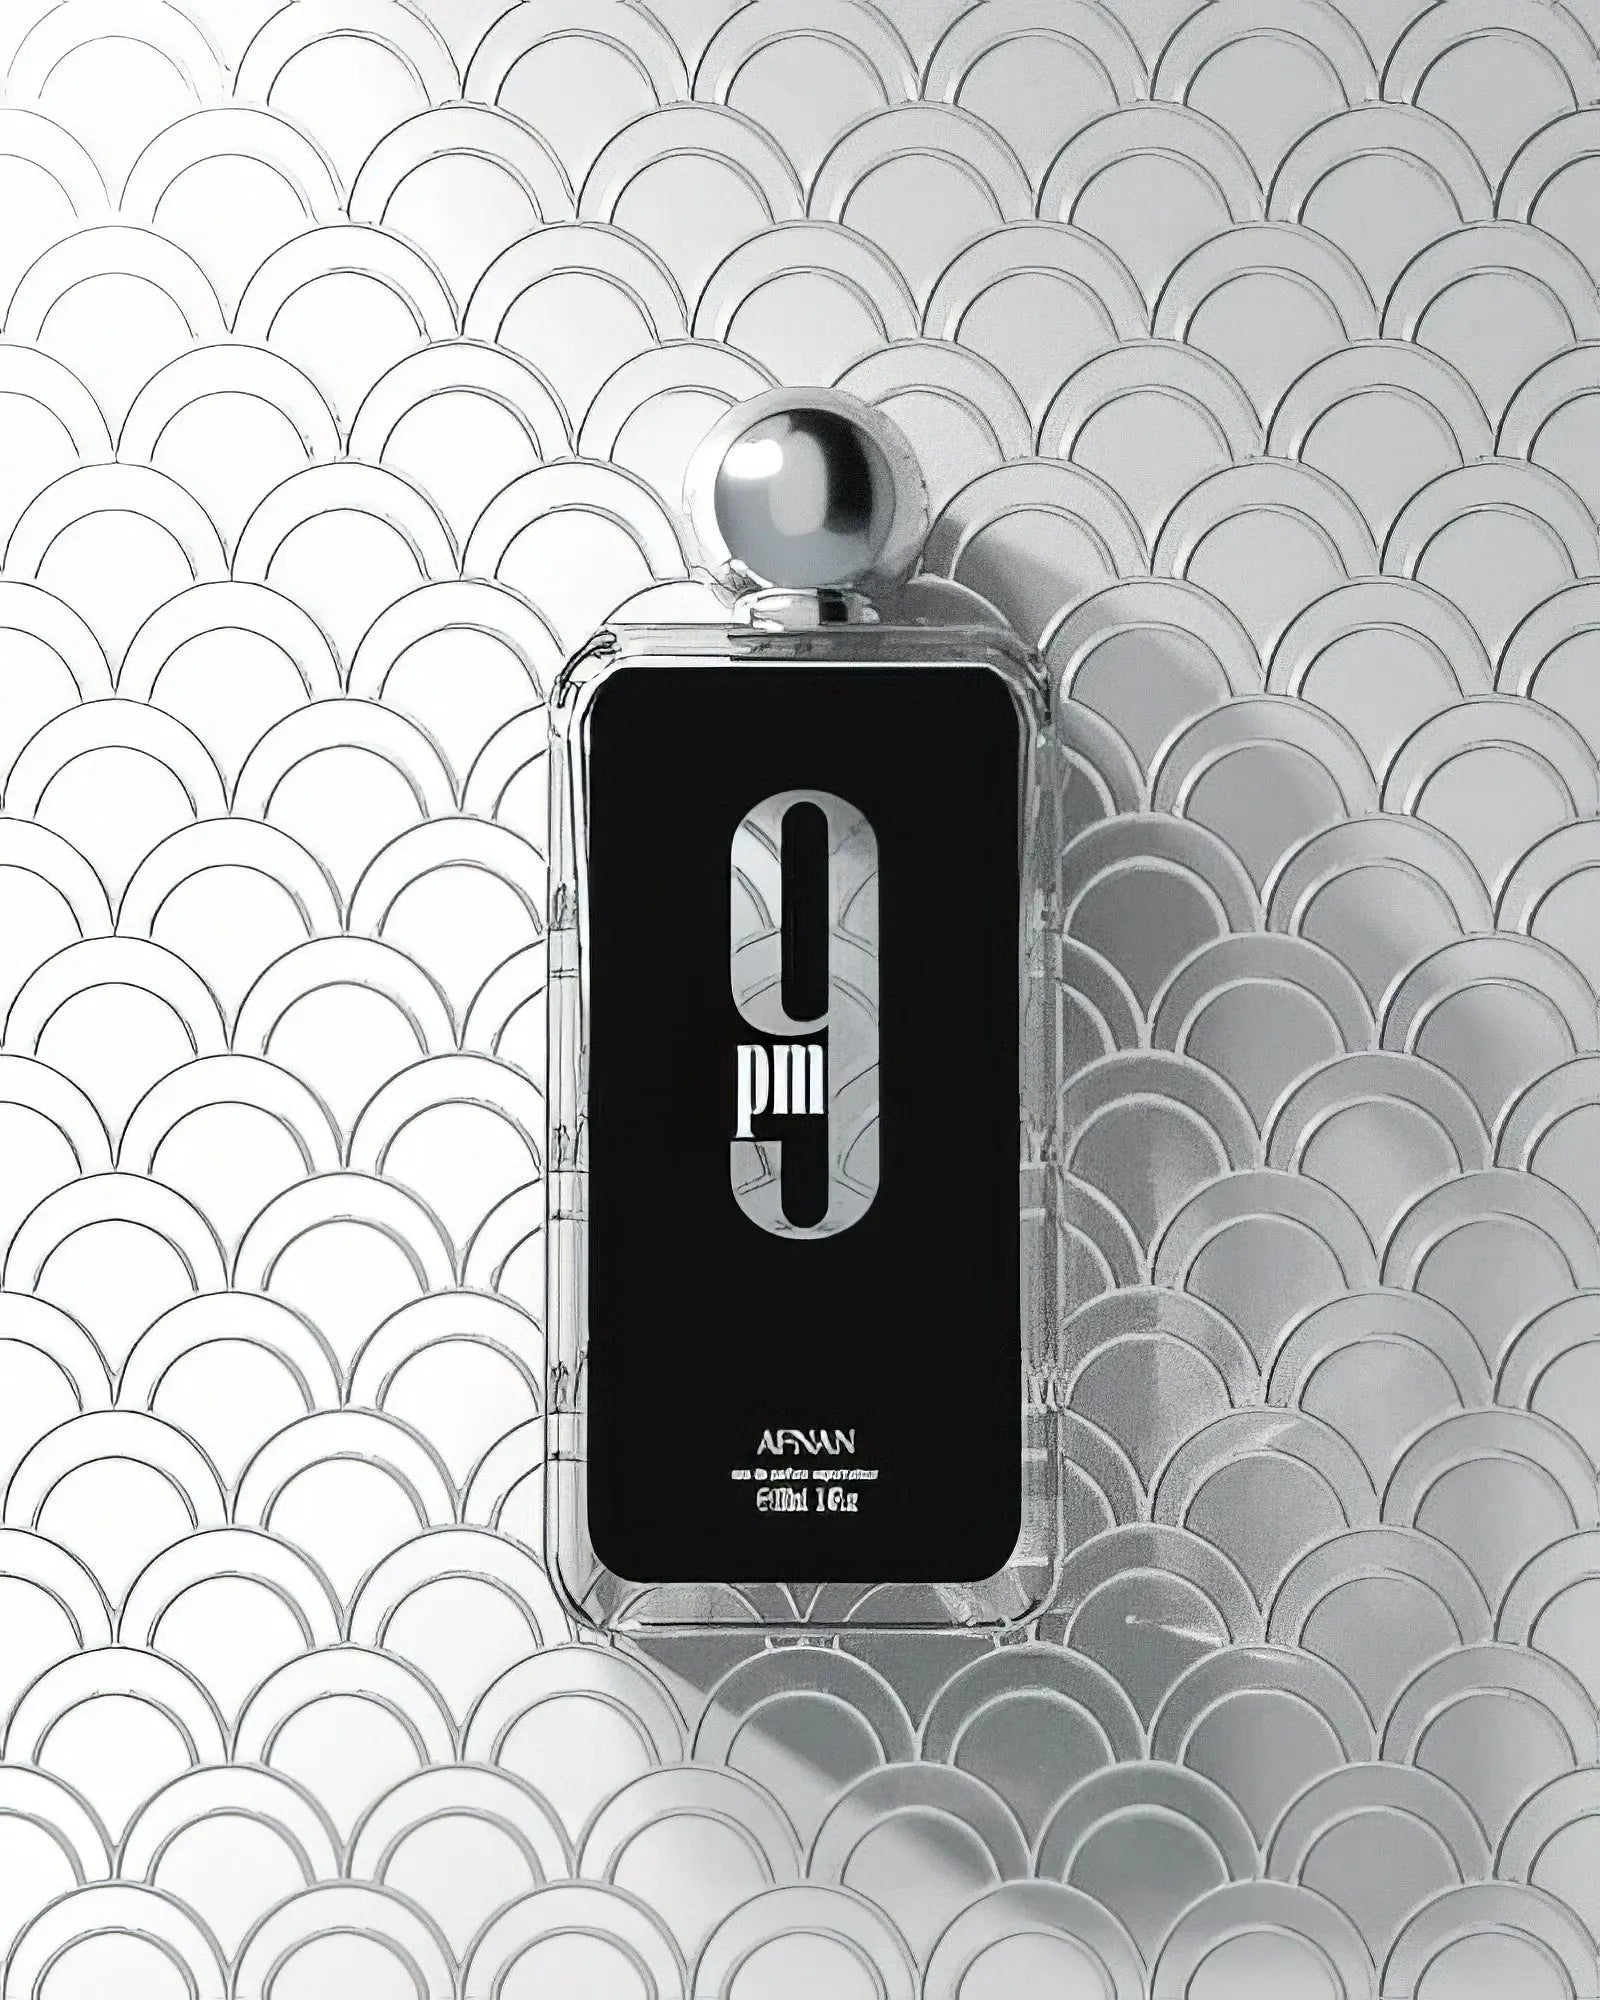 Afnan 9 PM perfume bottle displayed against a textured silver scallop-patterned backdrop, emphasizing the fragrance's sleek design and modern aesthetics.